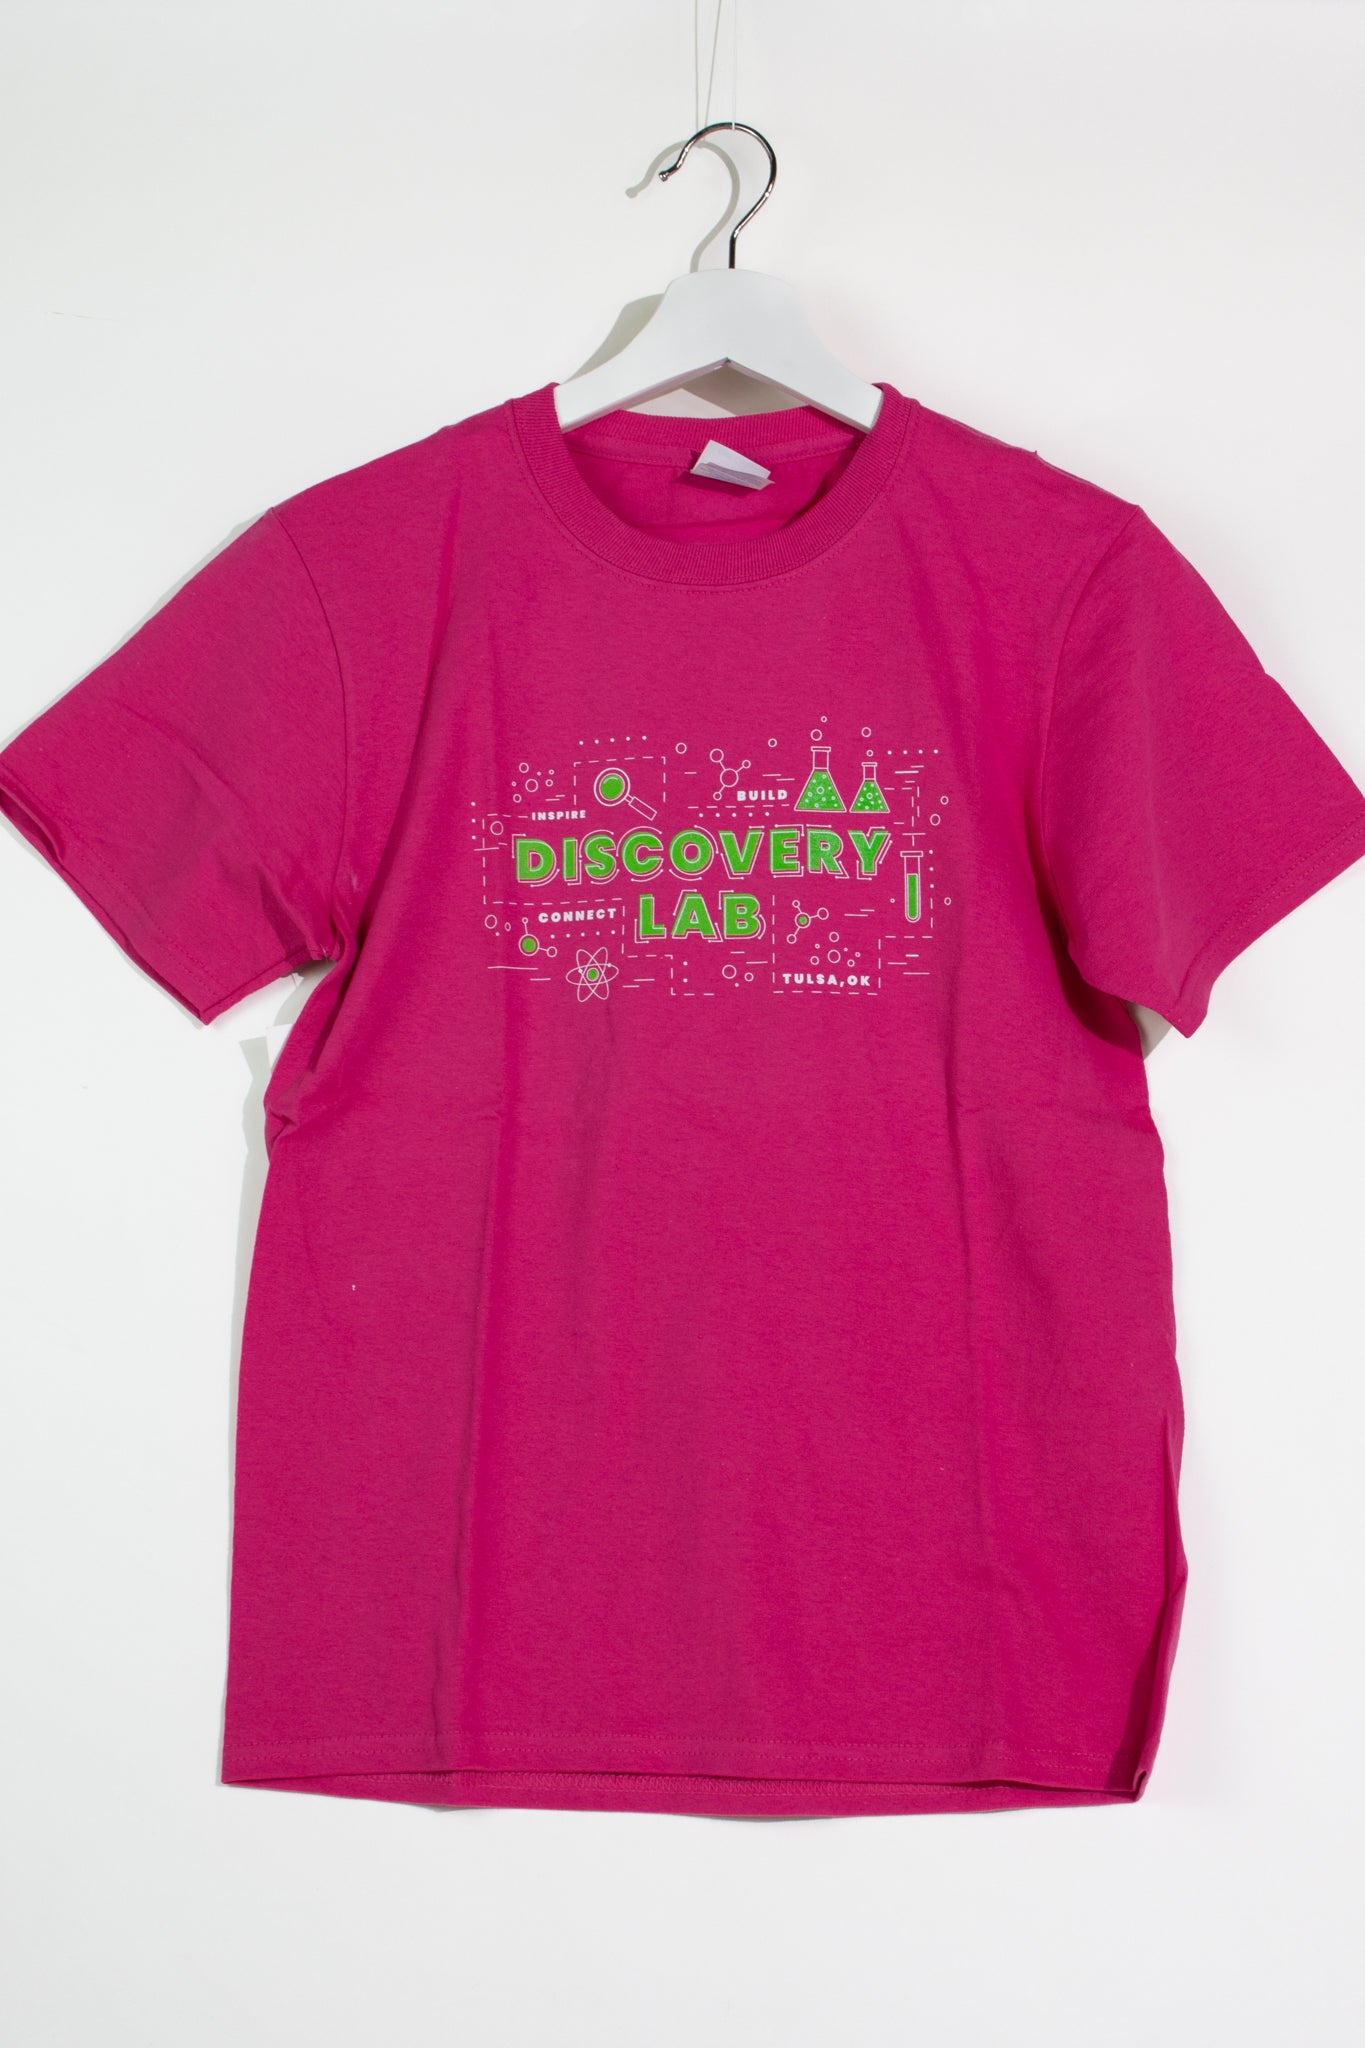 Discovery Lab Special Logo Tee - Stemcell Science Shop